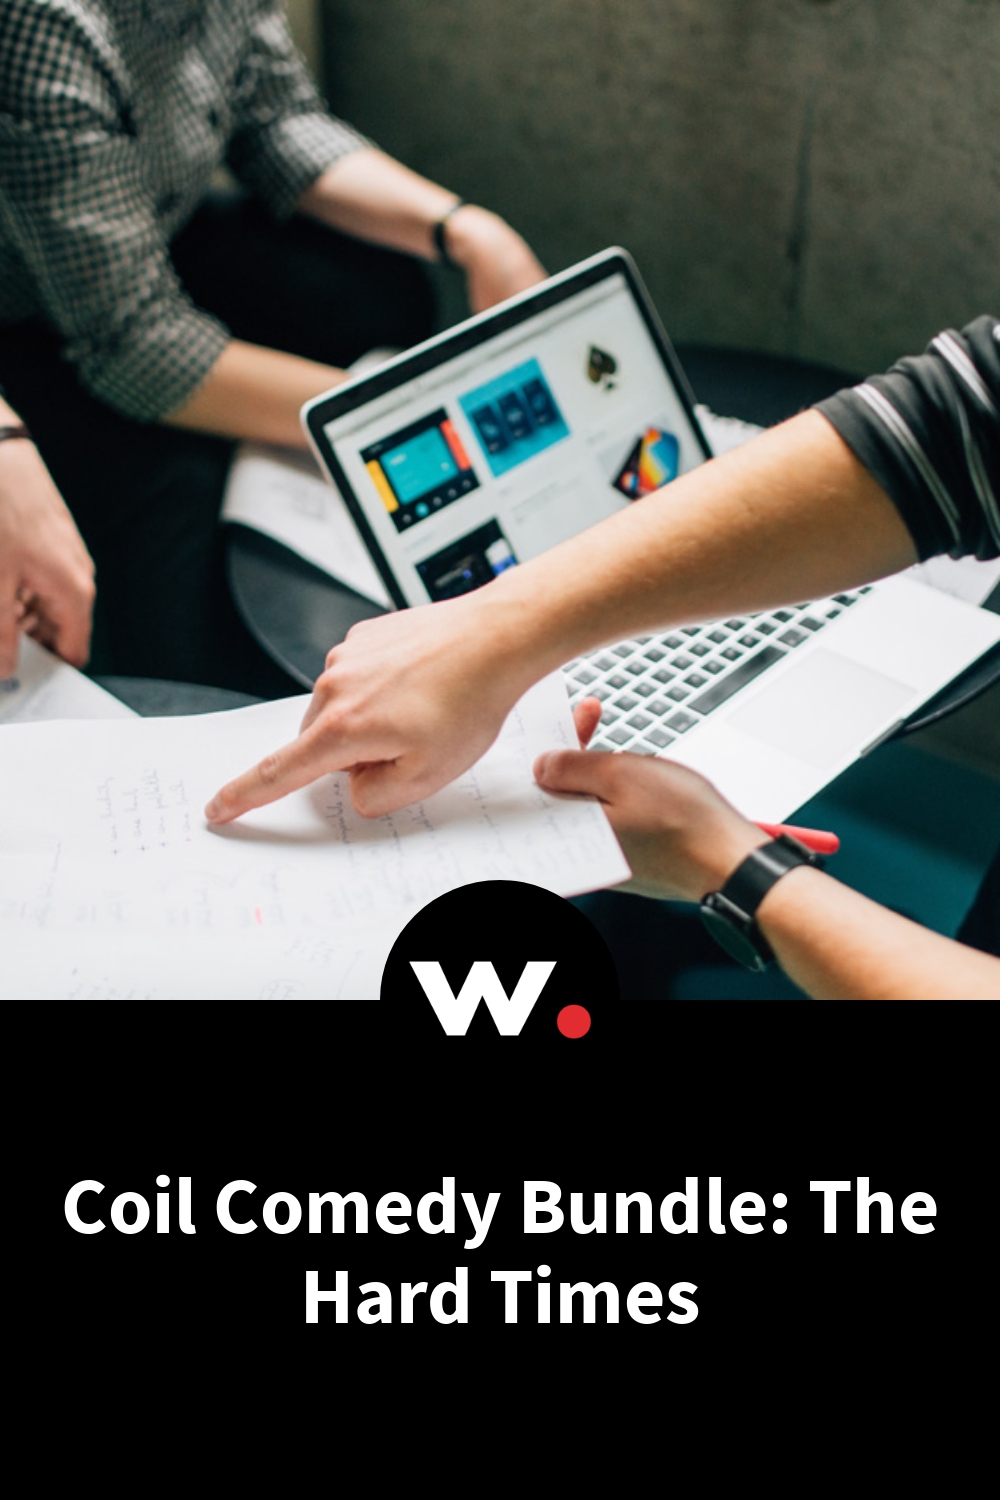 Coil Comedy Bundle: The Hard Times